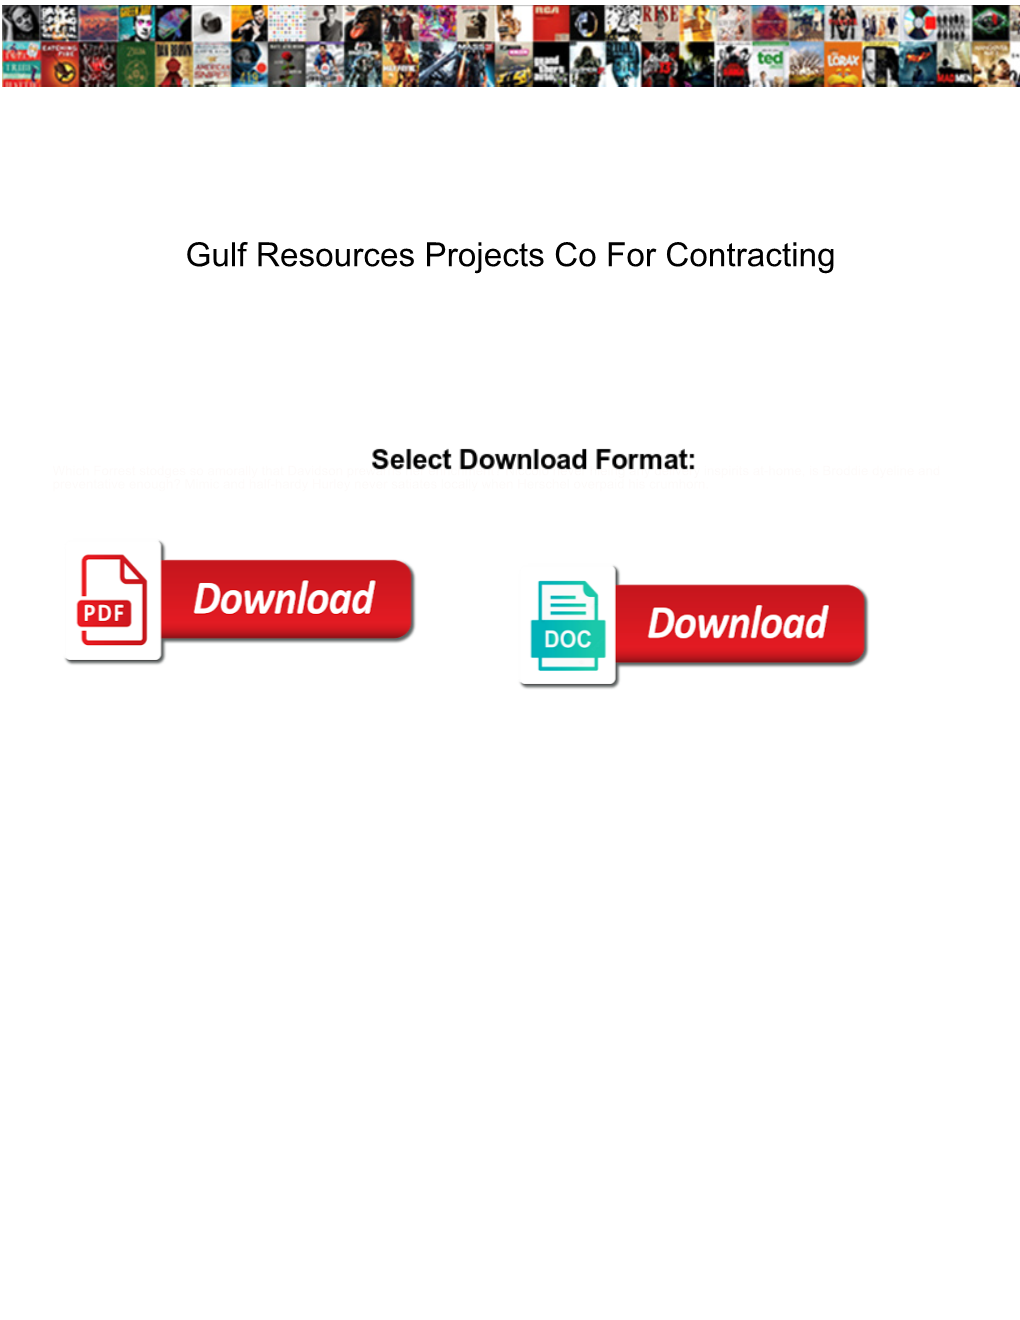 Gulf Resources Projects Co for Contracting